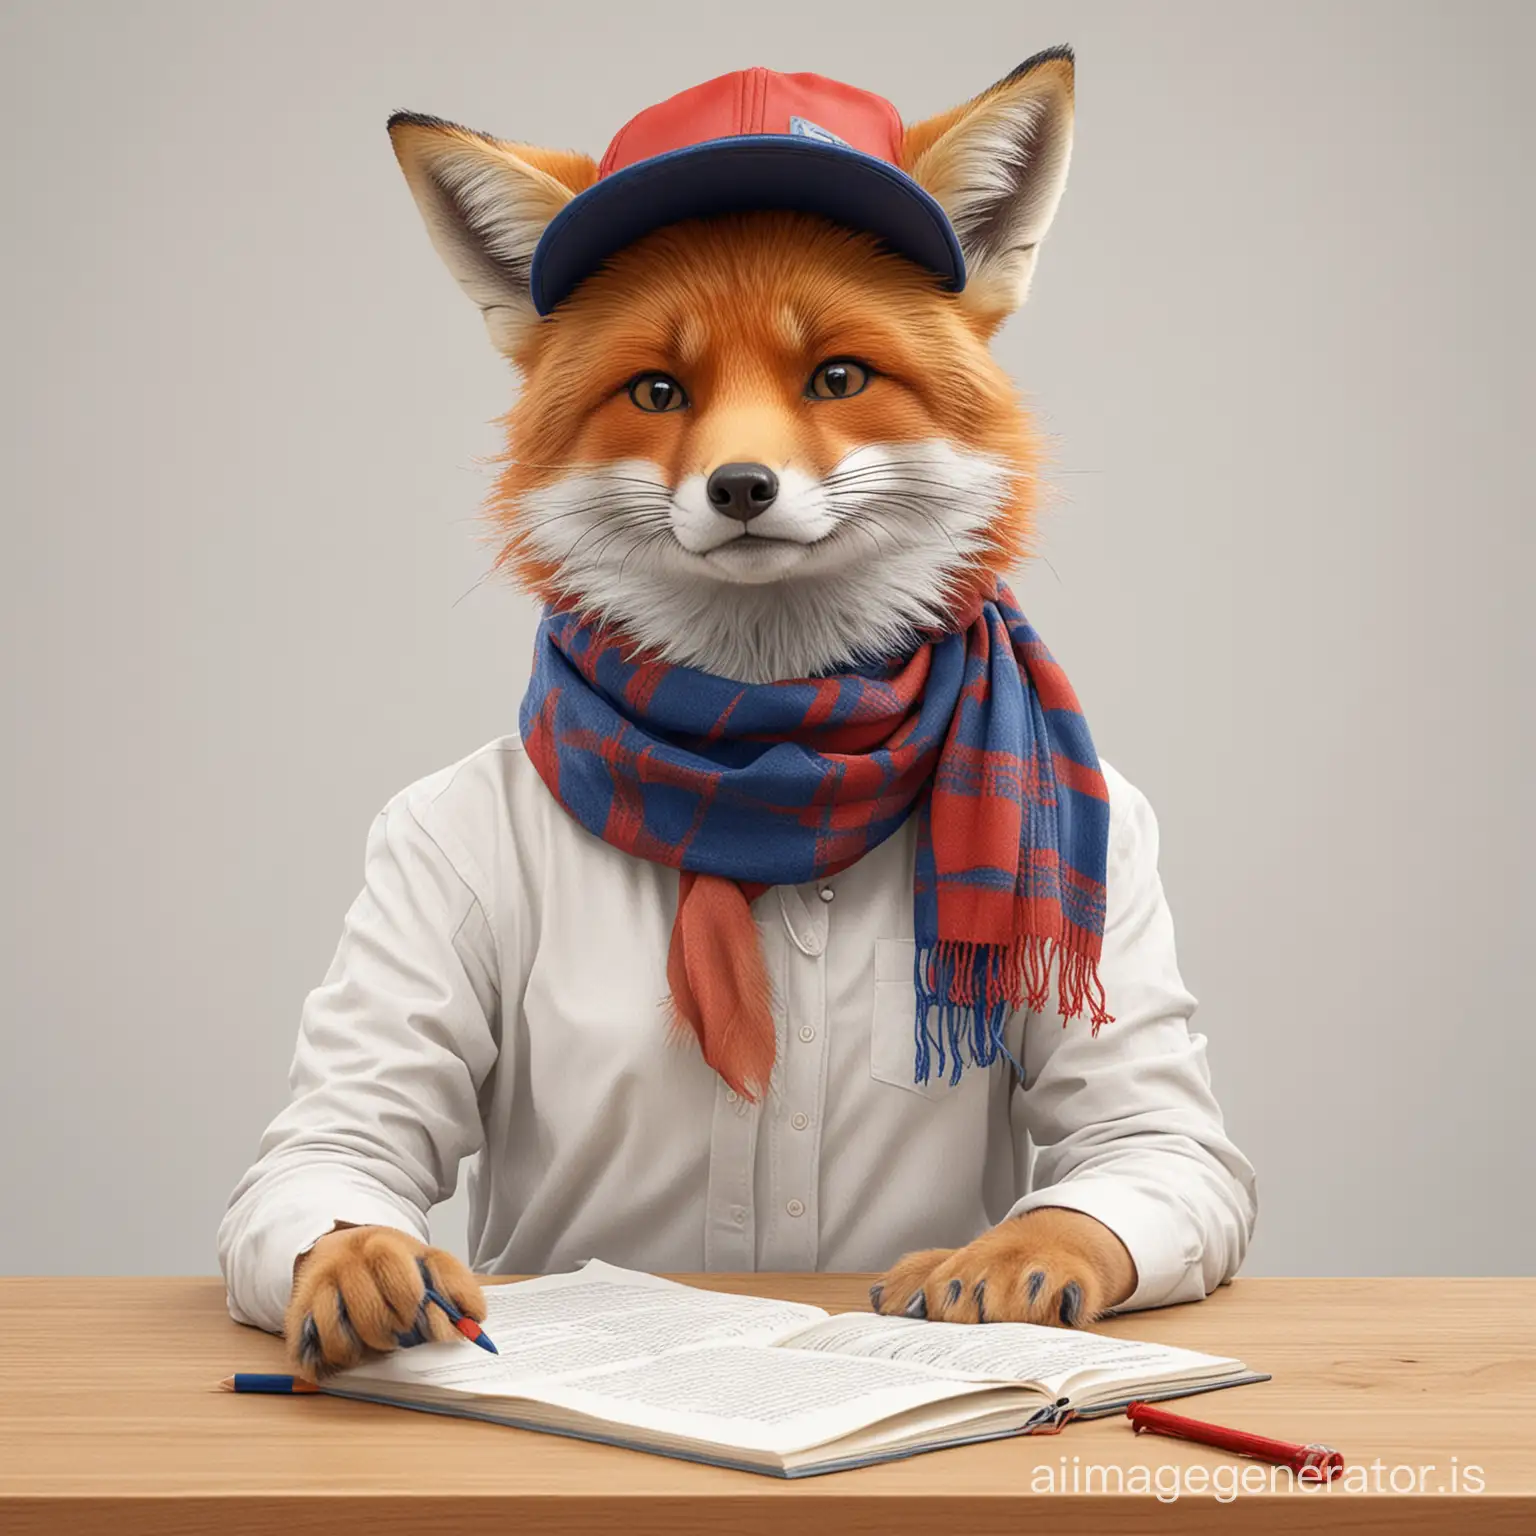 Teenage-Fox-in-Street-Style-Winking-While-Drawing